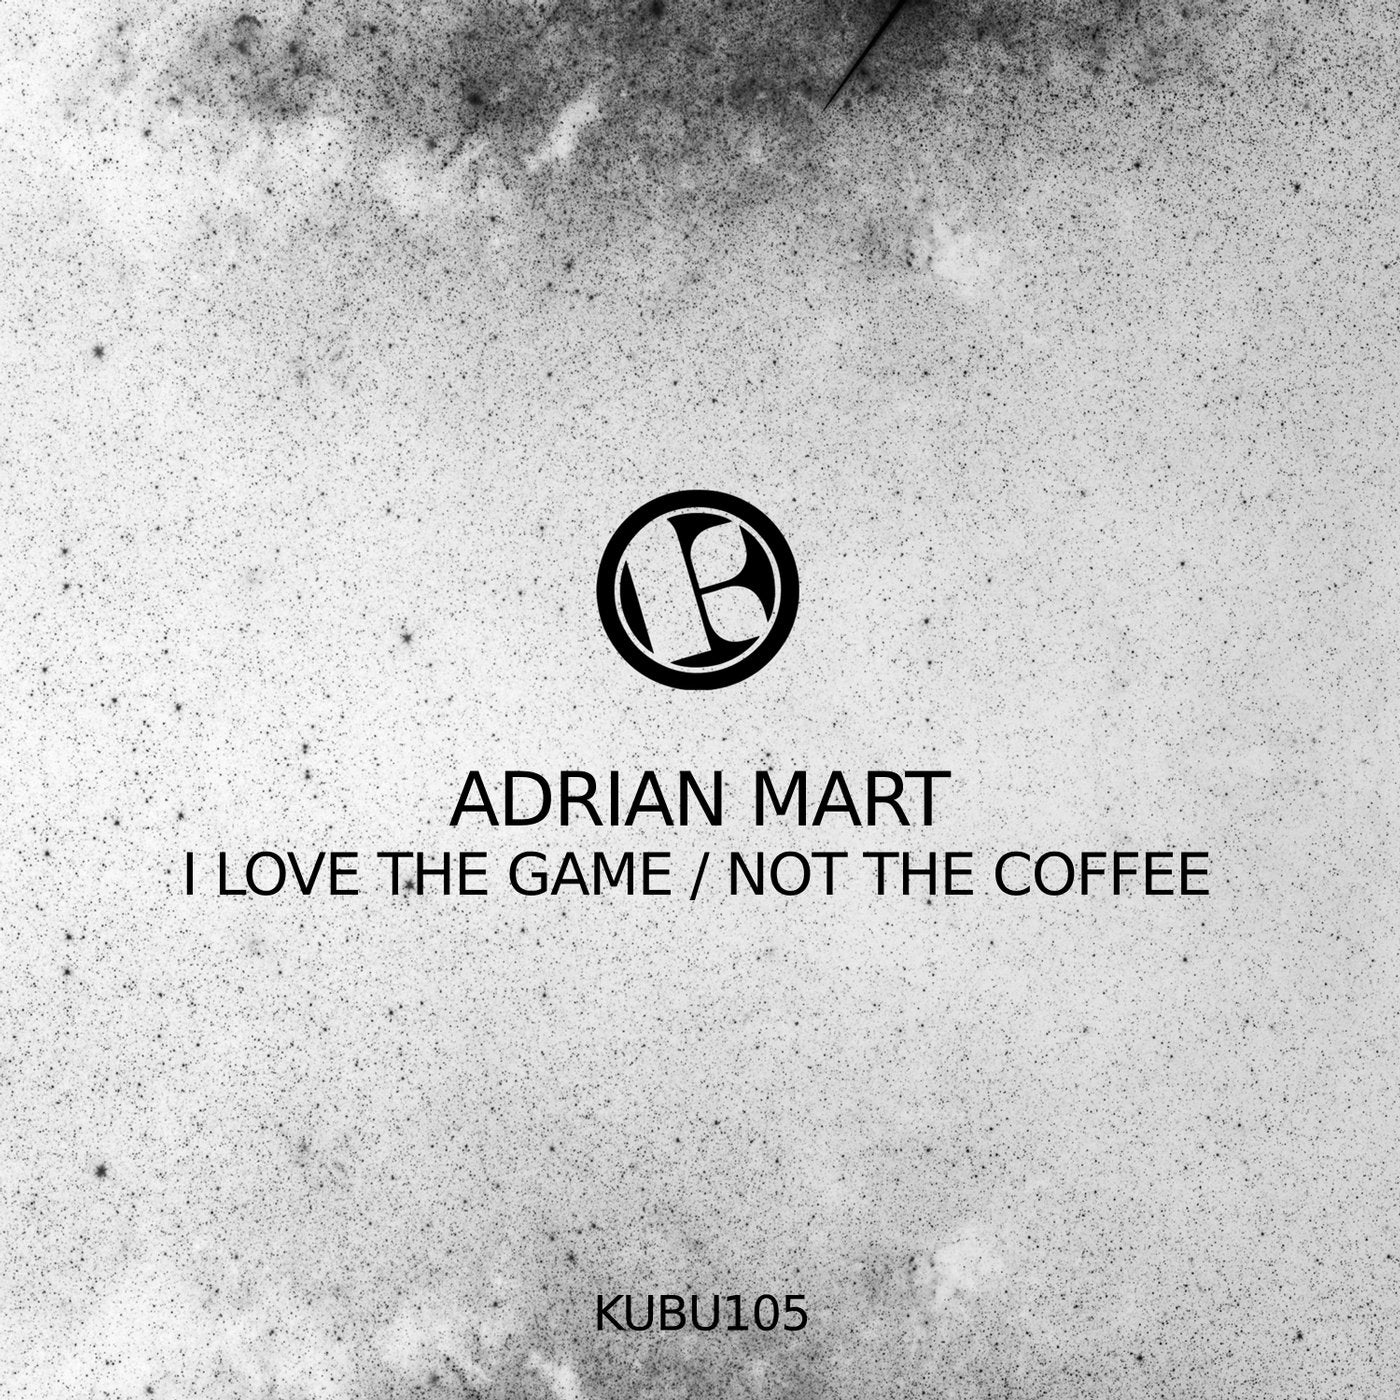 I Love the Game / Not the Coffee